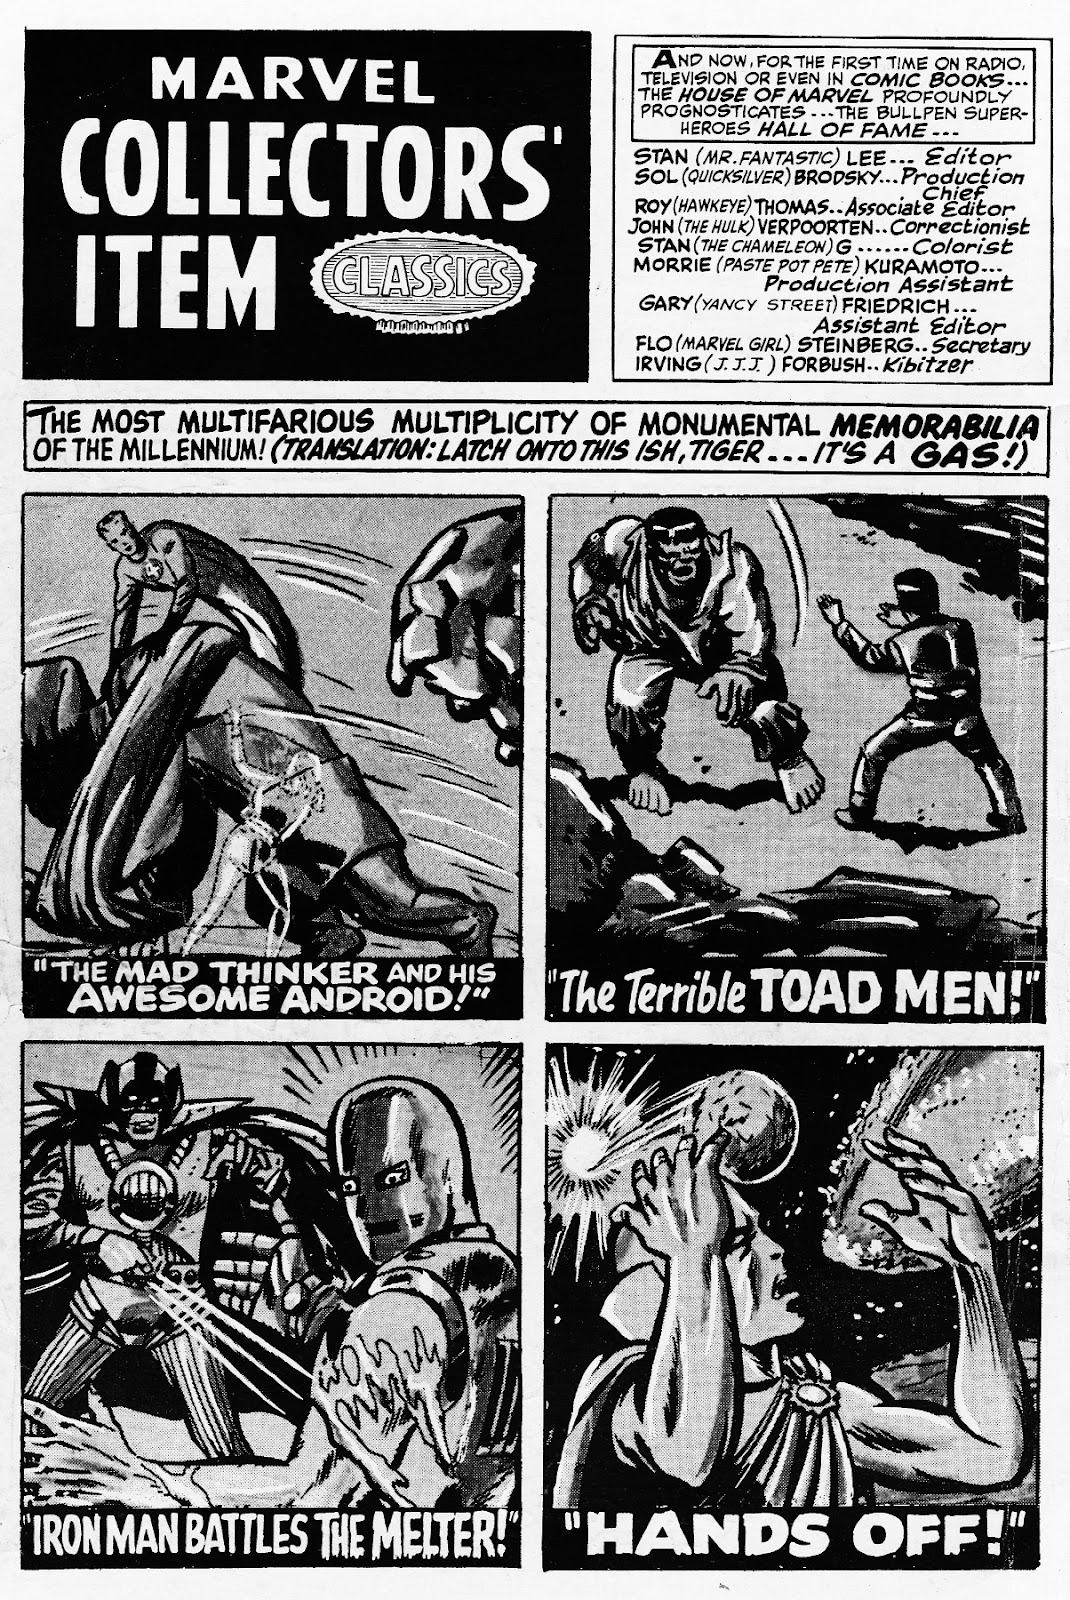 Marvel Collectors' Item Classics issue 10 - Page 2